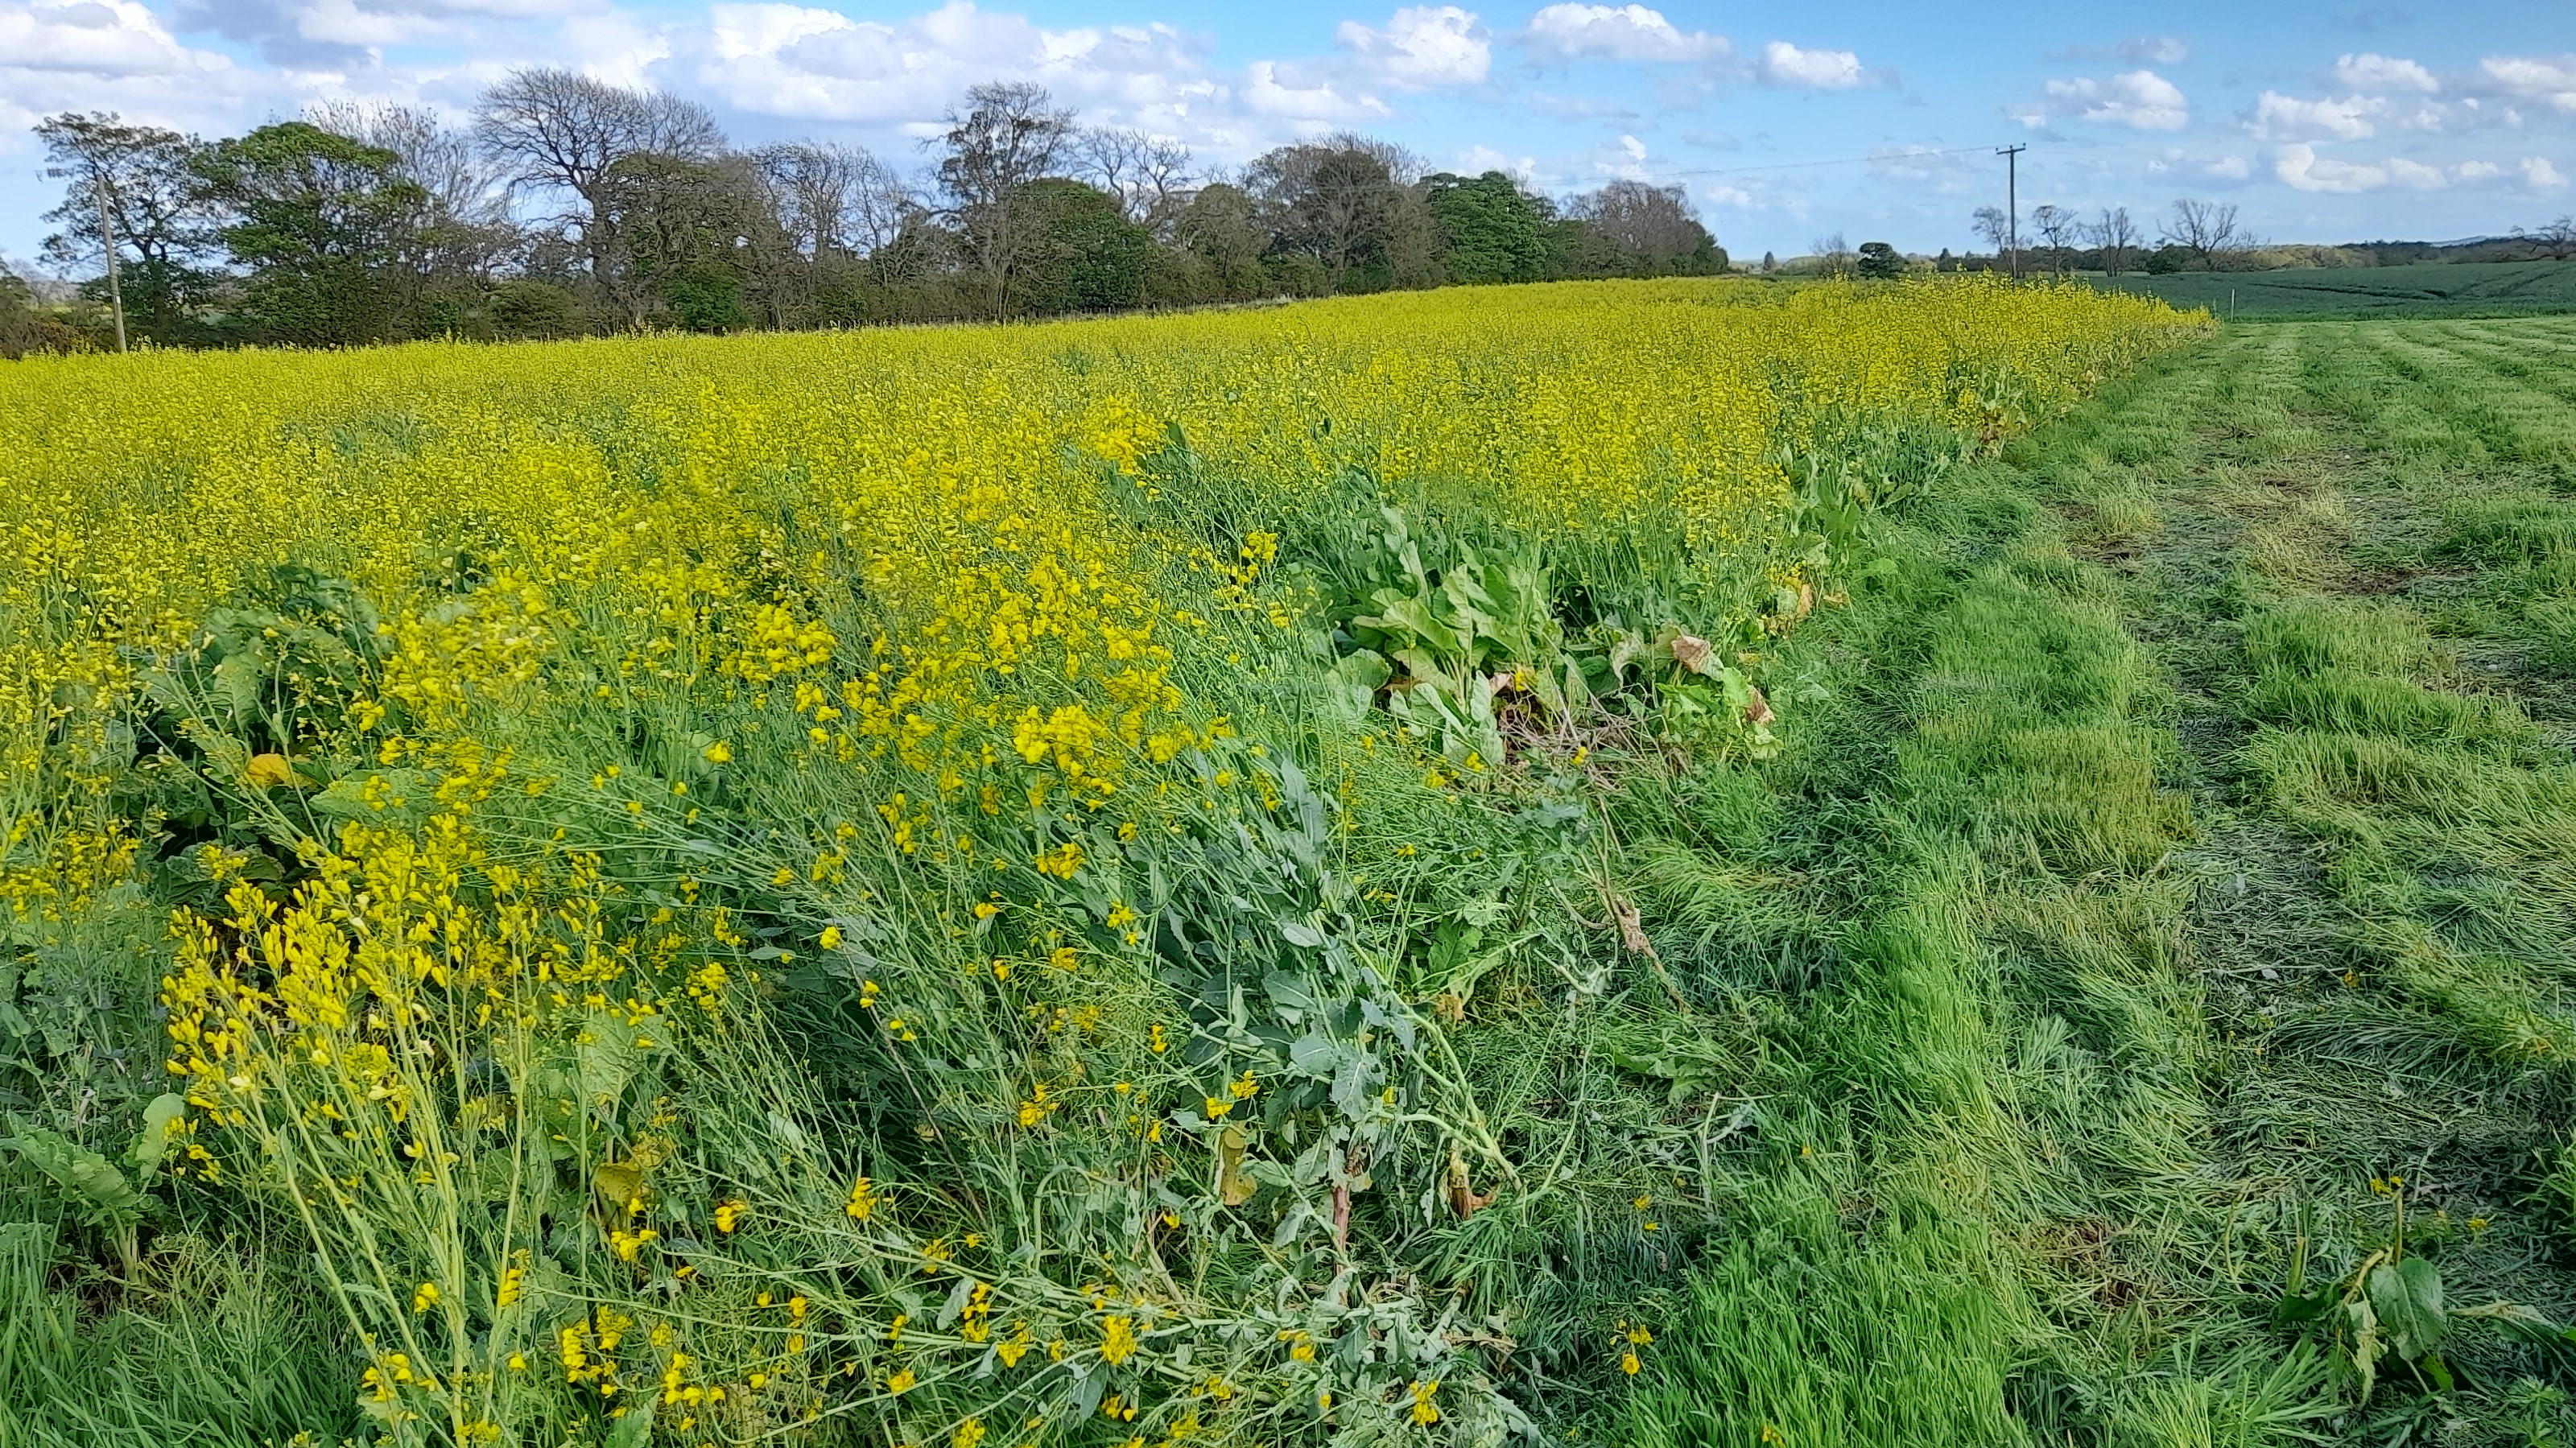 Mixed cover crops improve soil fertility for the next crop